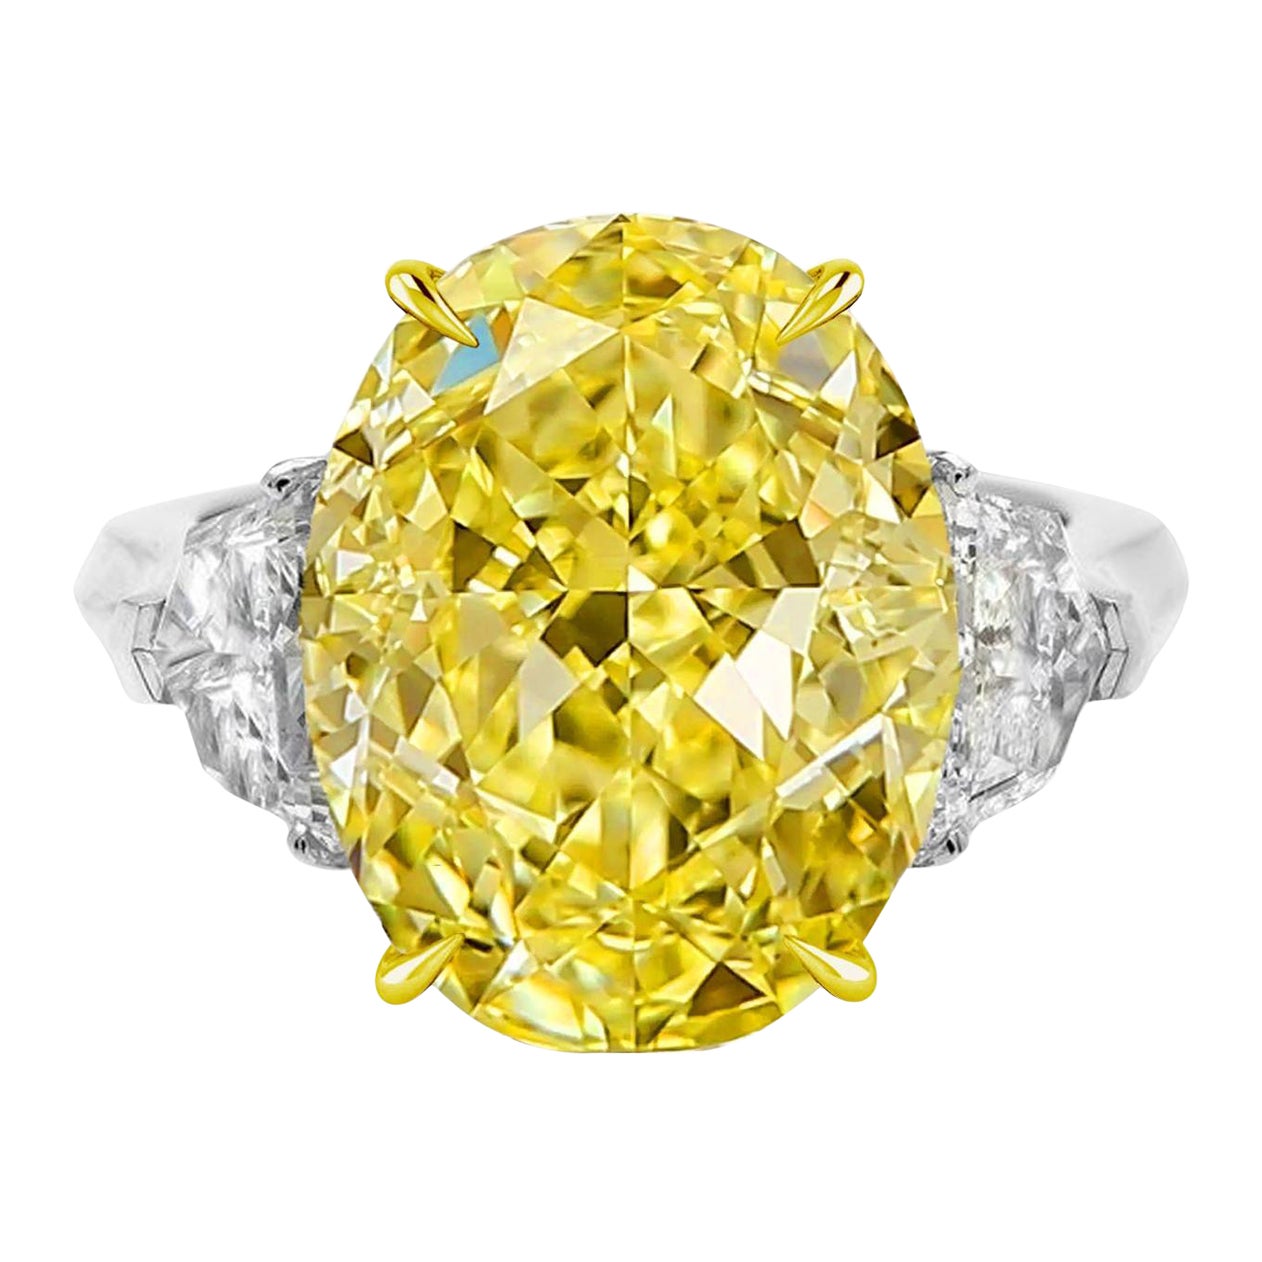 GIA Certified 5.18 Carat Fancy Yellow Diamond Ring FLAWLESS  For Sale